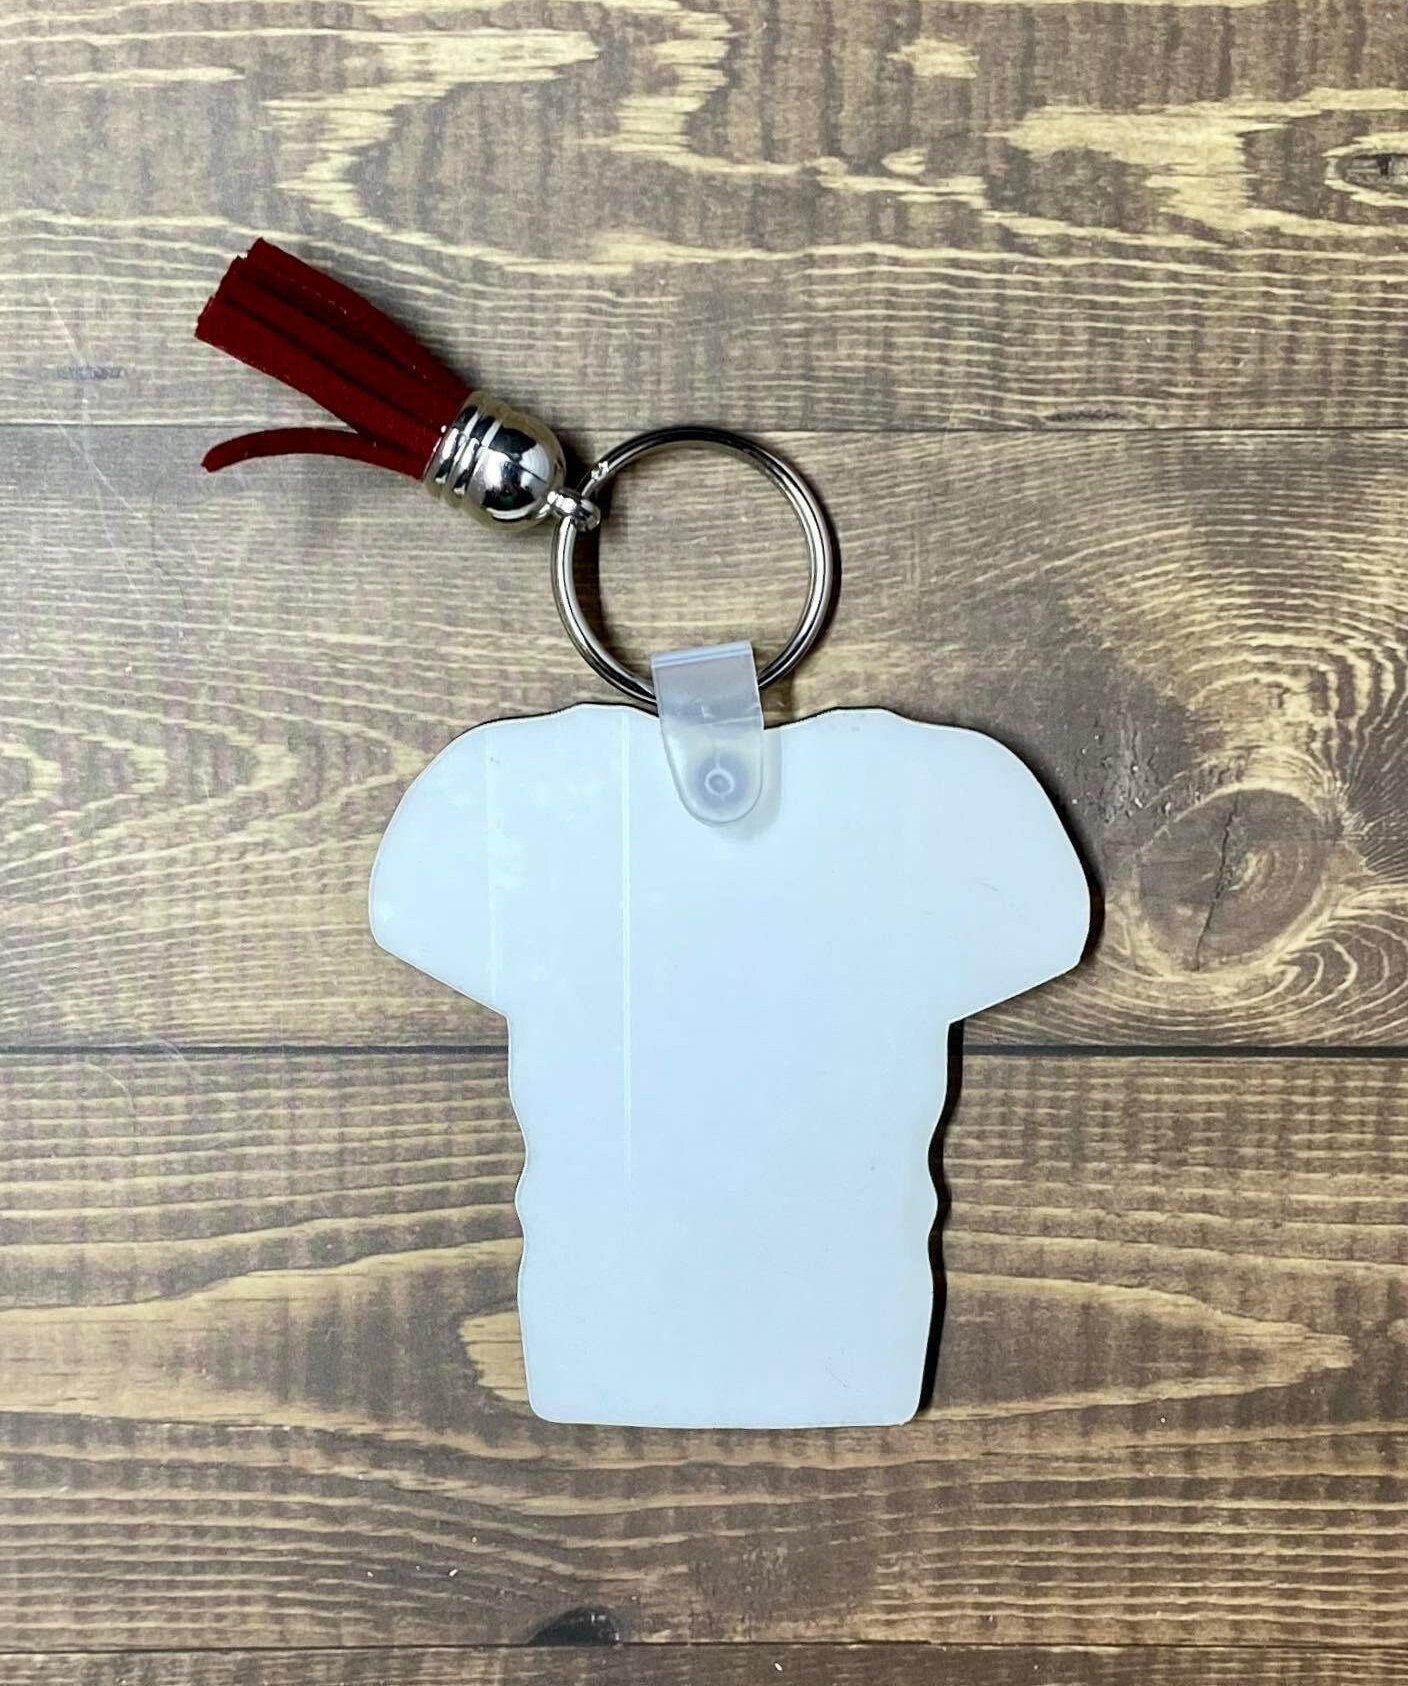 Plain White Sublimation Blank Mdf Keychains at Rs 5/piece in Pilibhit